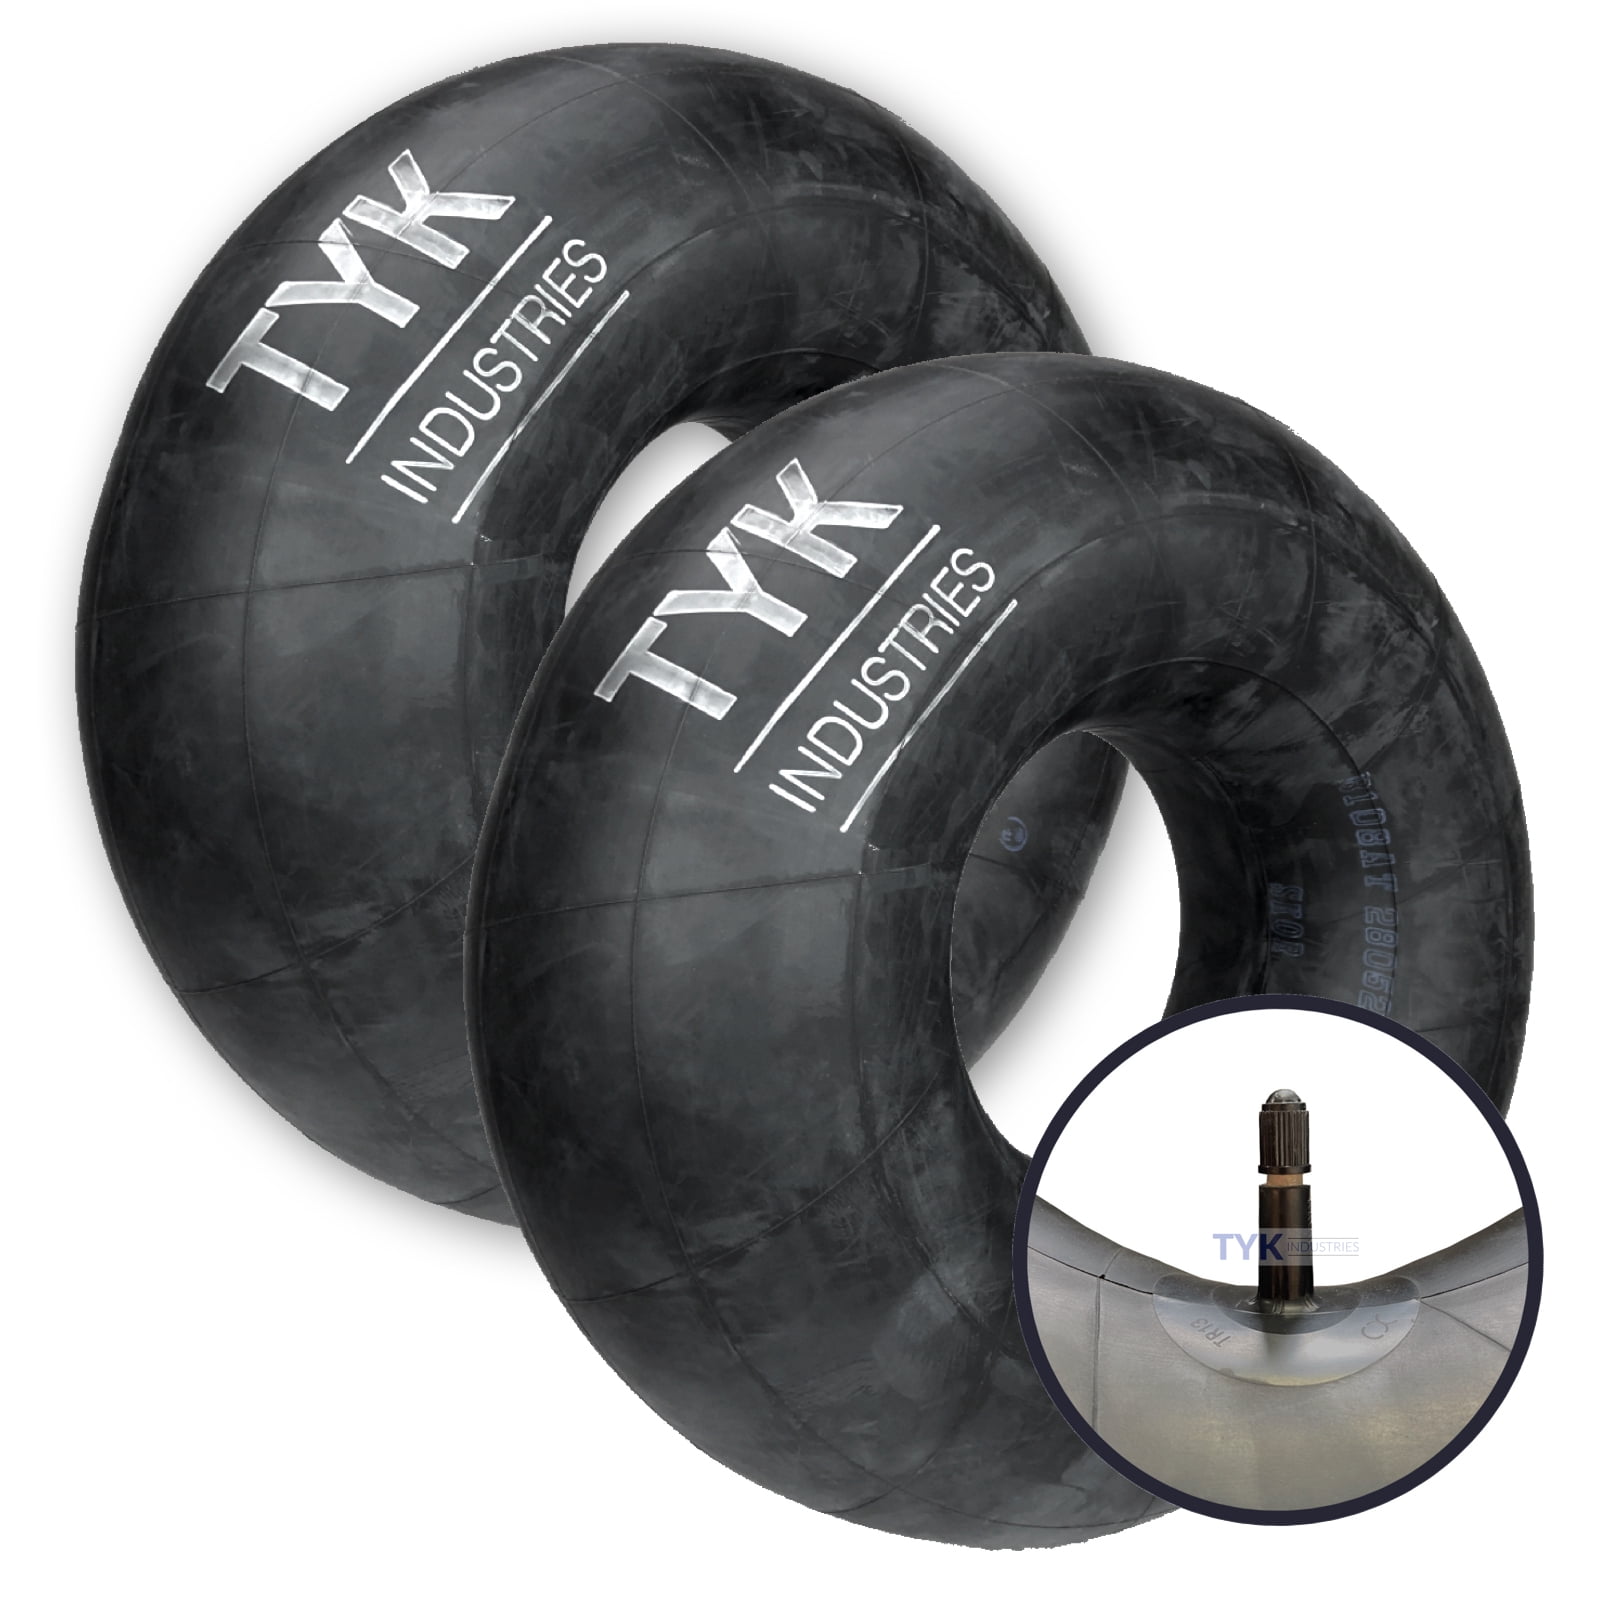  WEIYINGSI 12 1/2 x 2 3/4 Inner Tubes with TR13